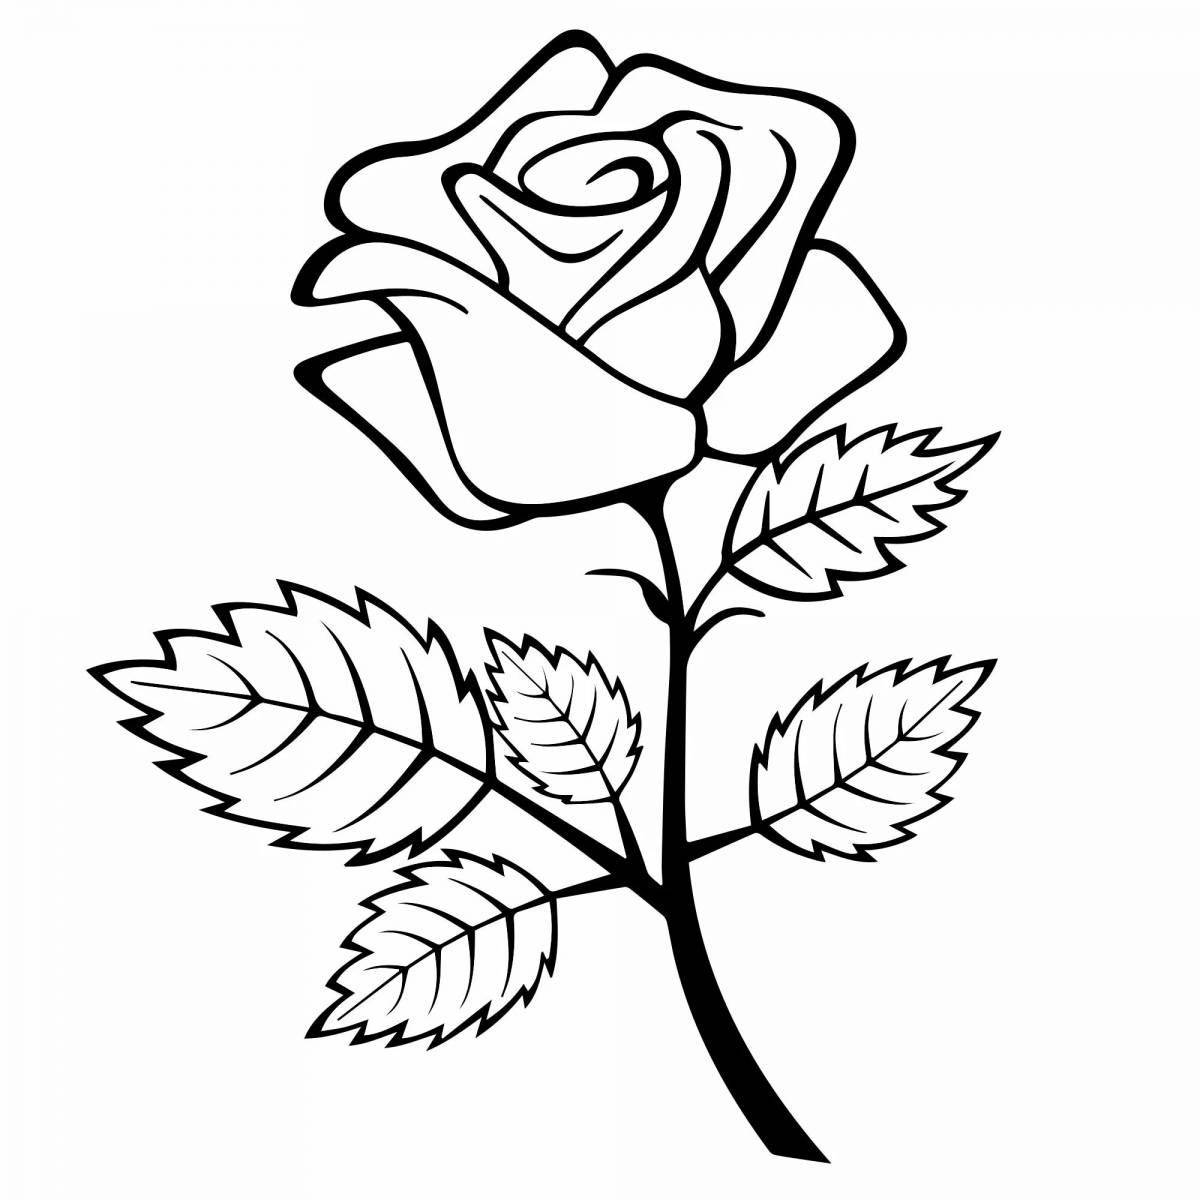 Colorful rose coloring page